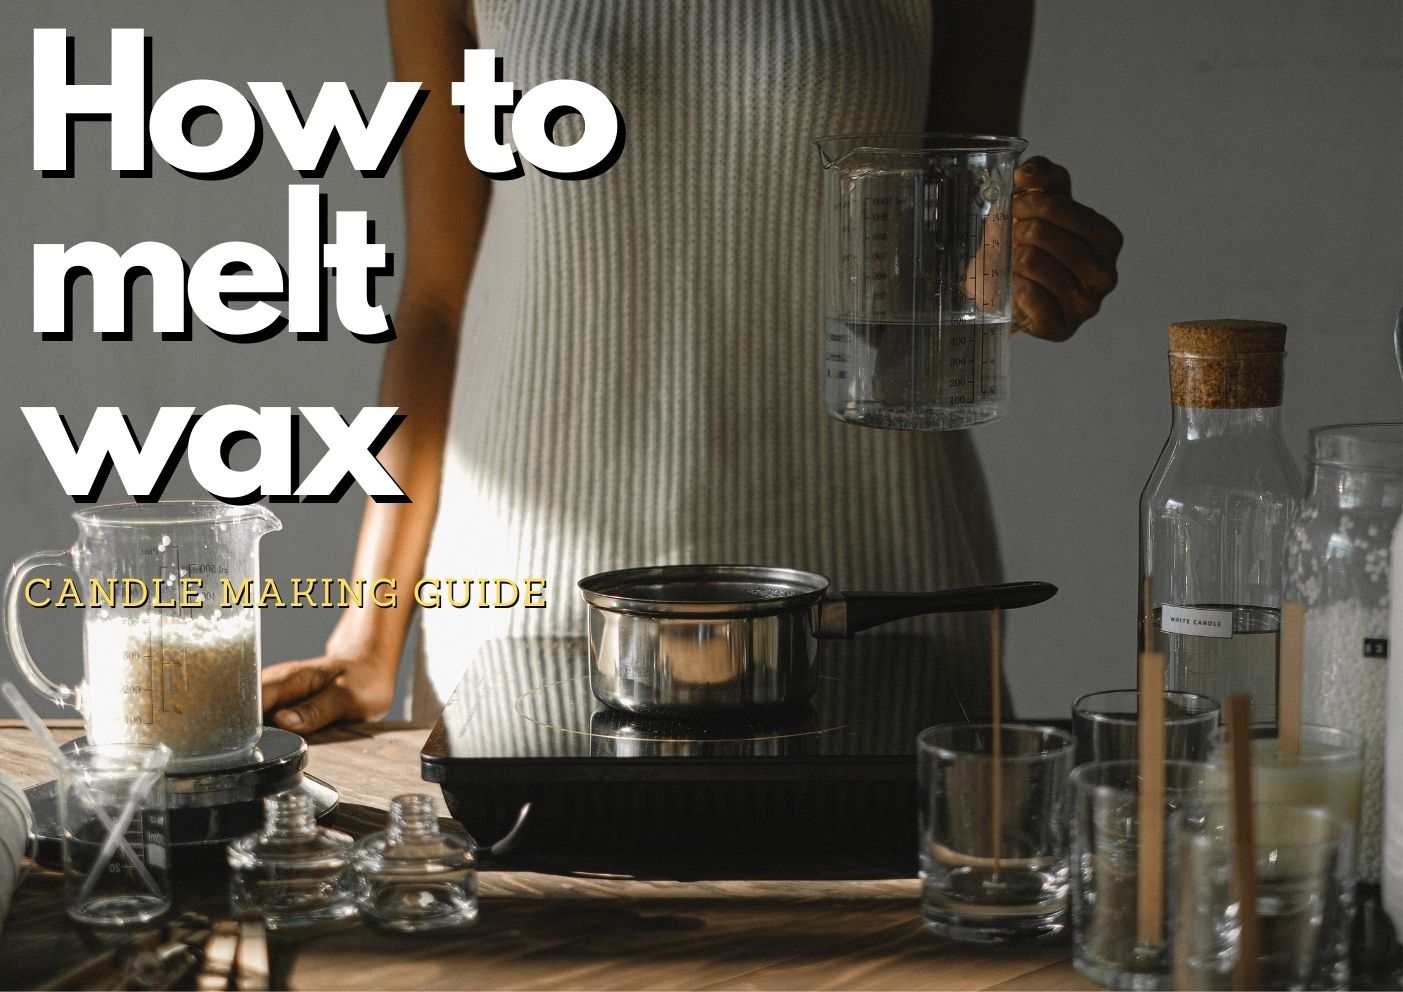 How to melt wax for candles